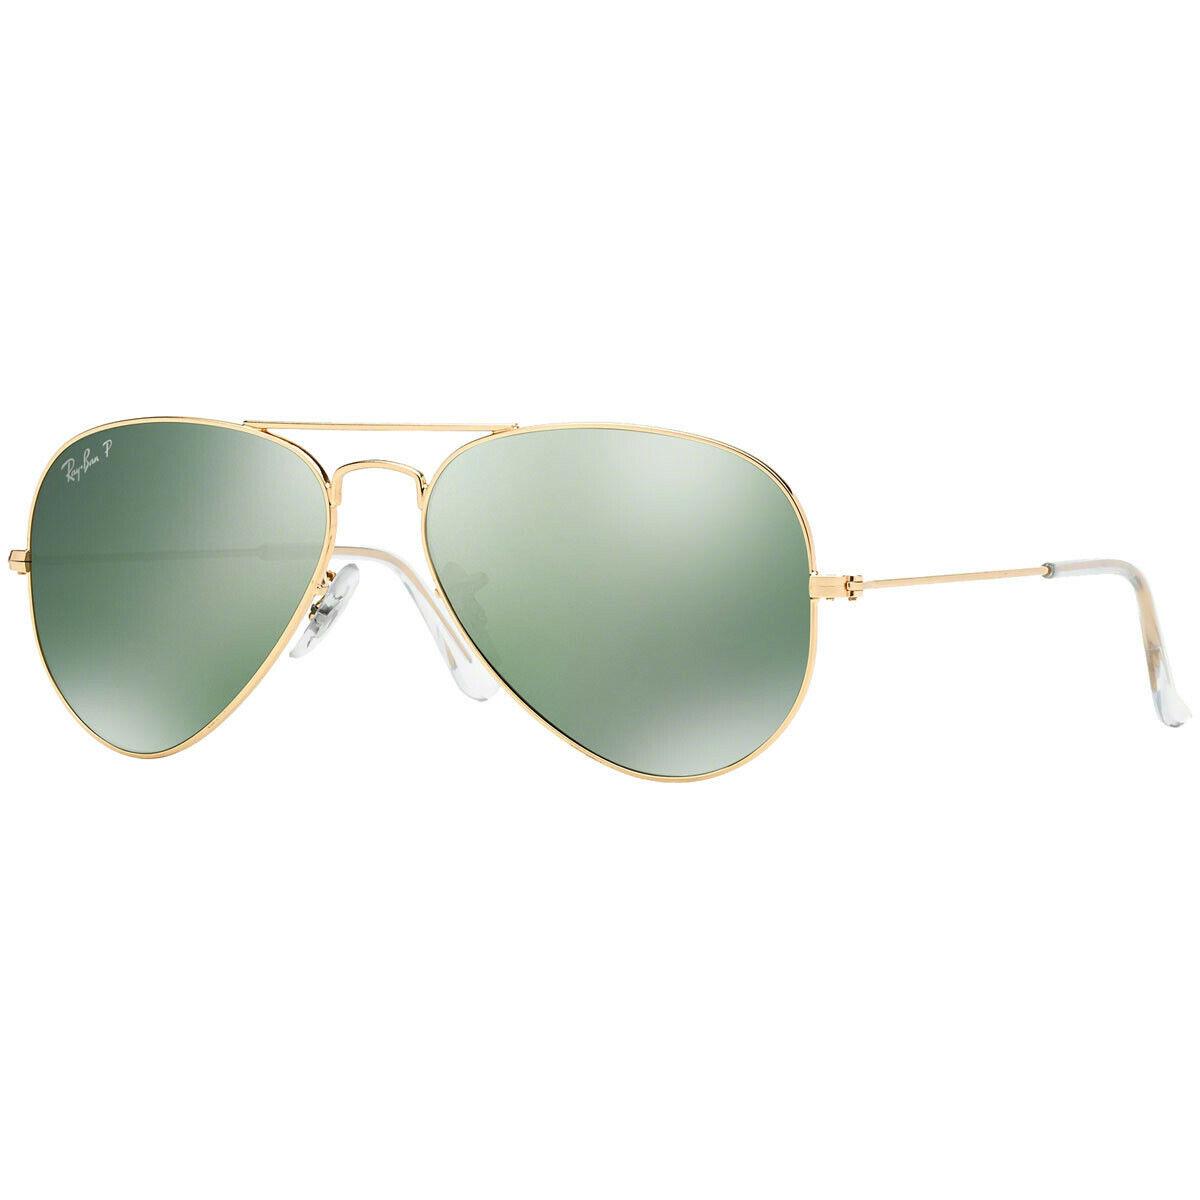 Ray-ban Sunglasses Aviator RB3025 001/M4 58mm Gold Green Silver Mirror Polarized